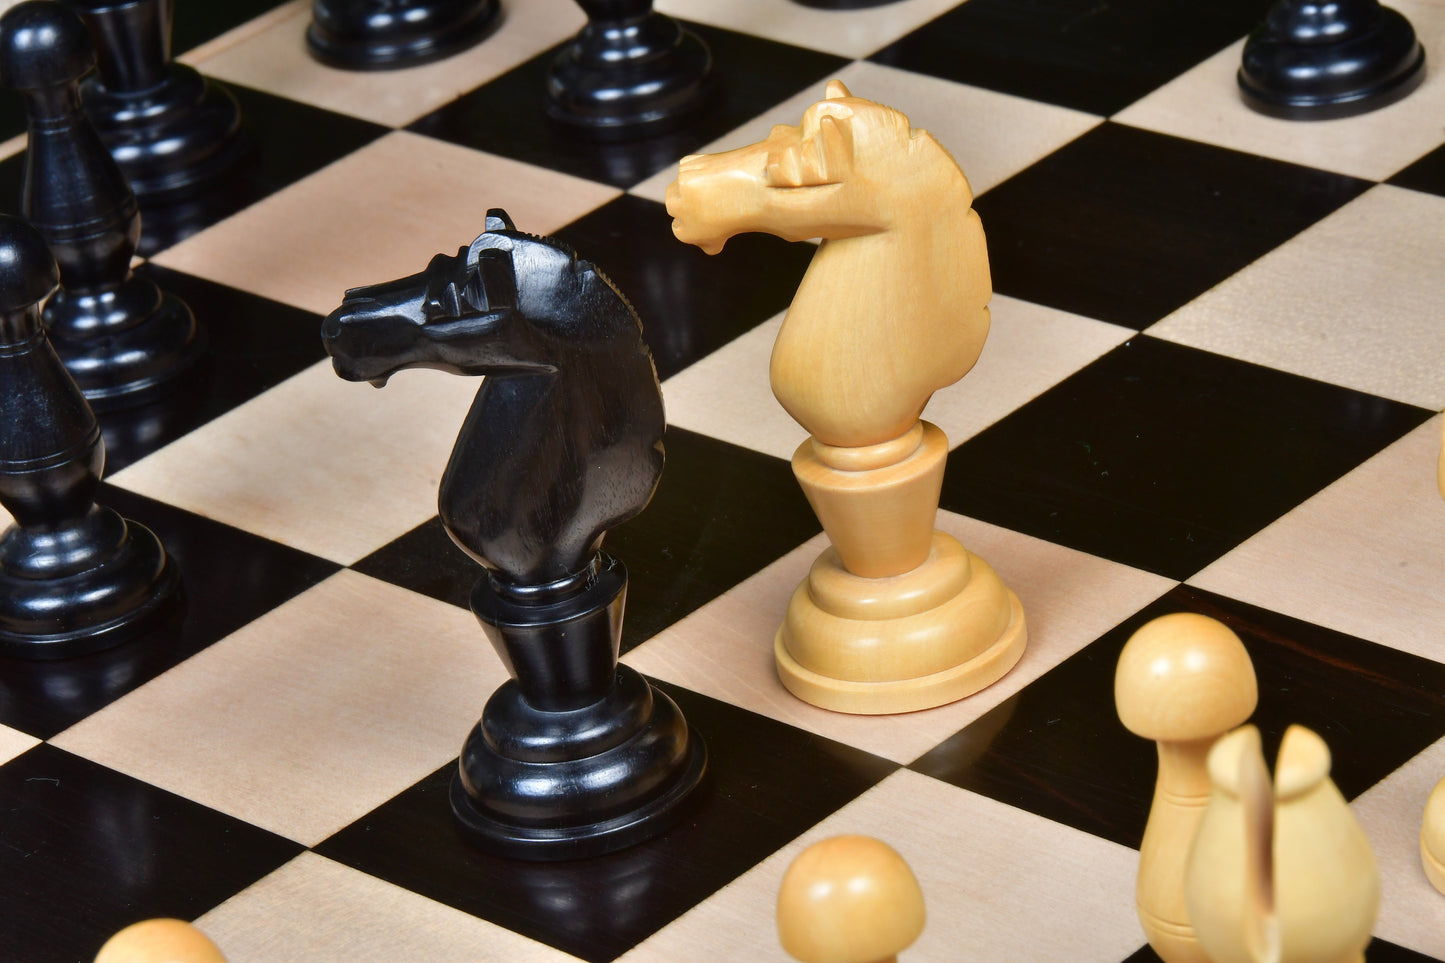 The Grand Divan Chess Pieces from the Famous Simpson's-in-the-Strand in Ebony & Boxwood - 4.2" King